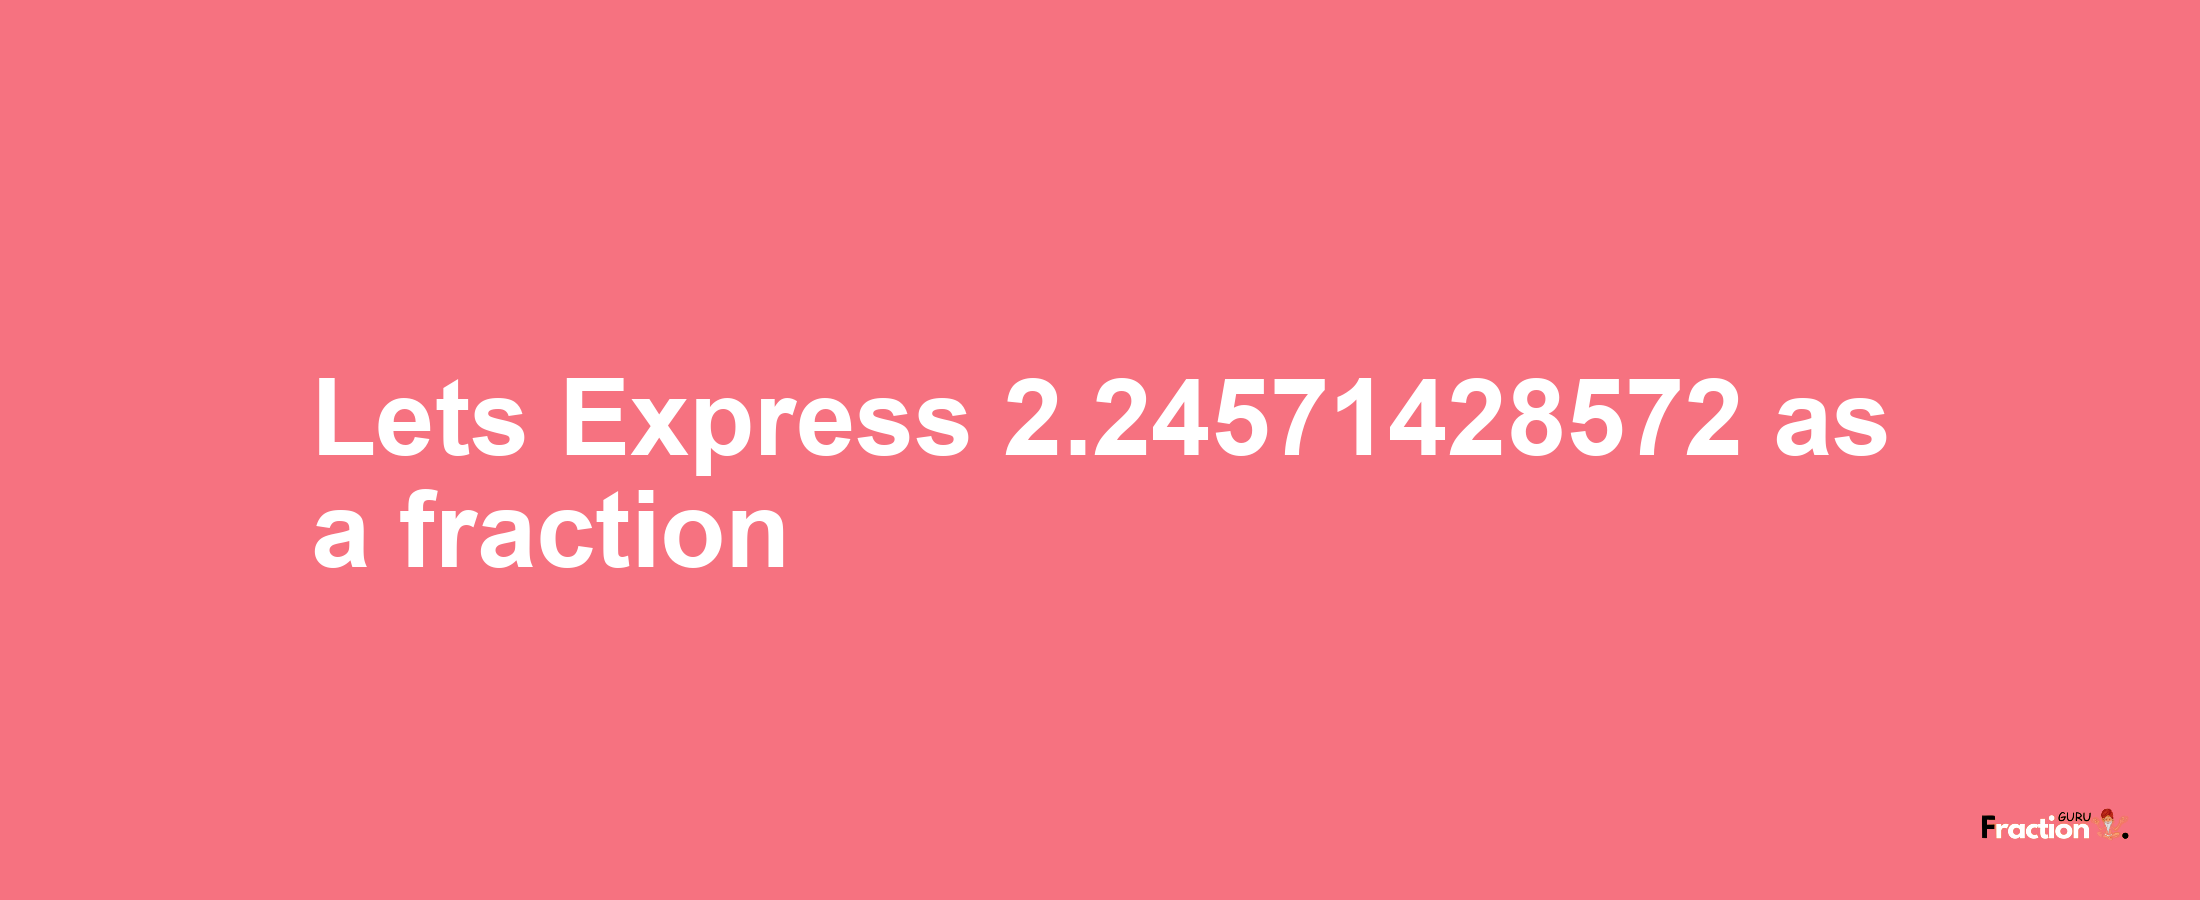 Lets Express 2.24571428572 as afraction